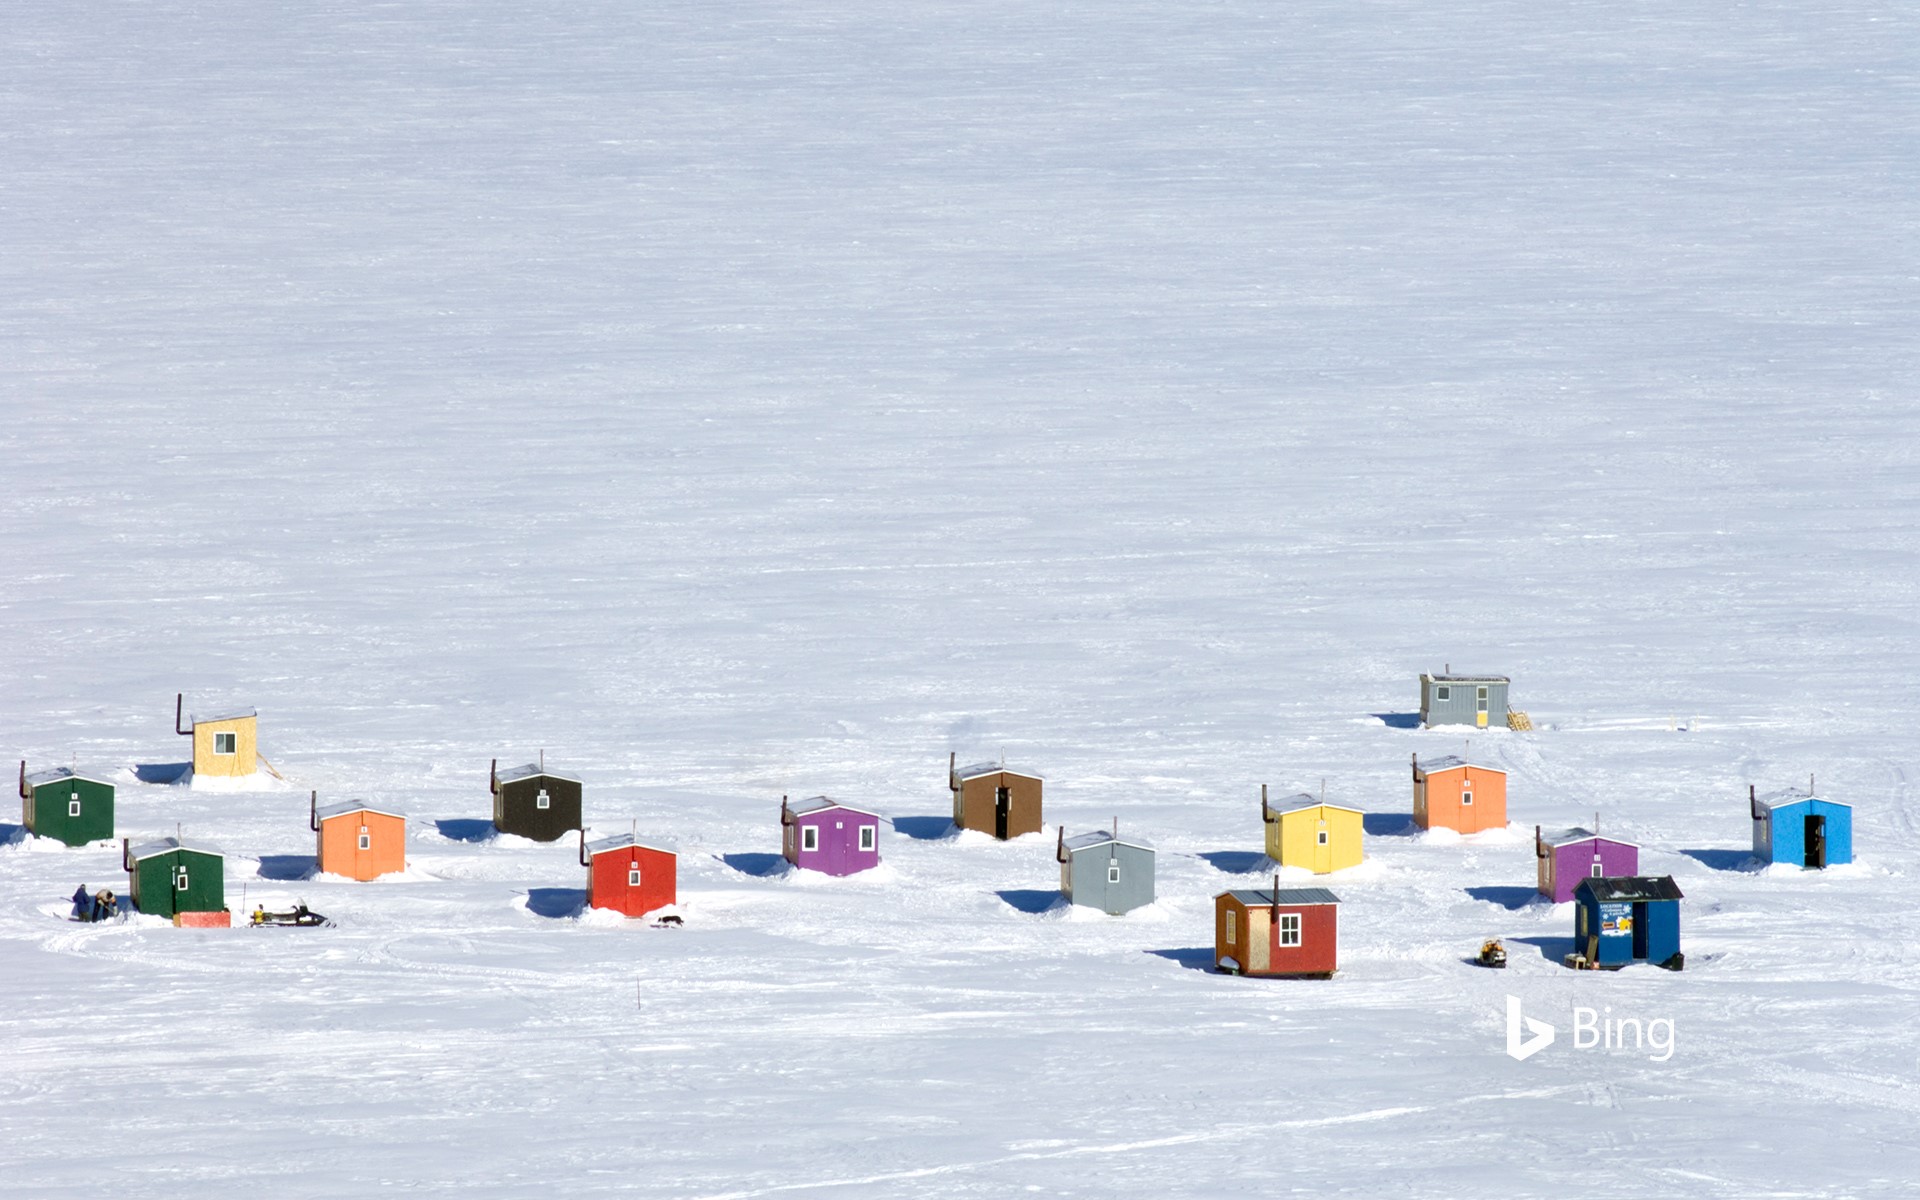 Ice fishing huts in L'Anse-St-Jean, Quebec, Canada